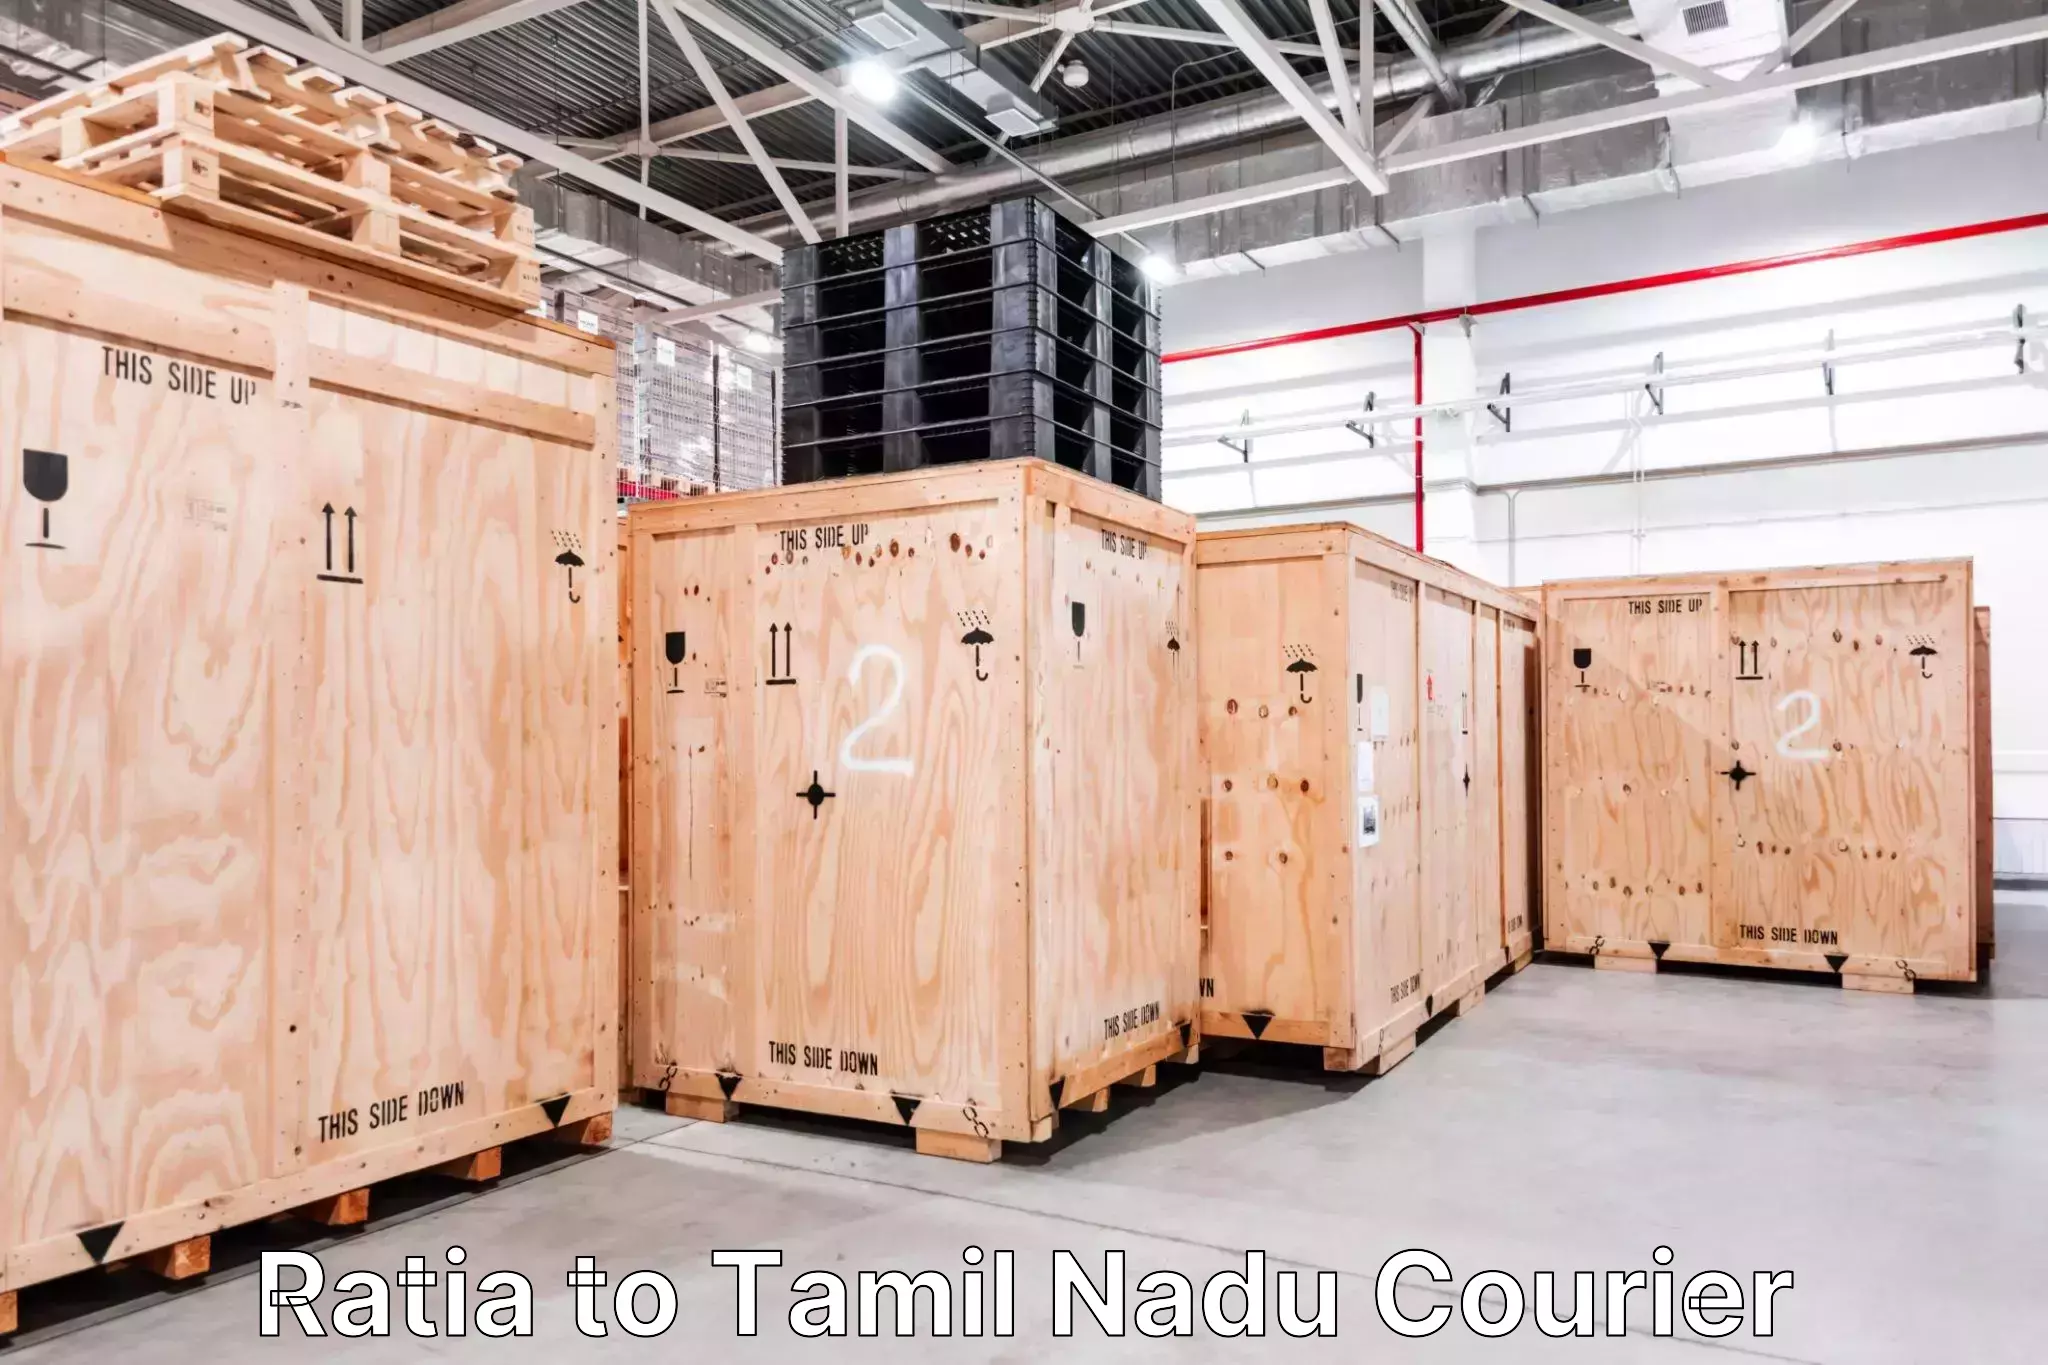 Hassle-free luggage shipping Ratia to Vellore Institute of Technology